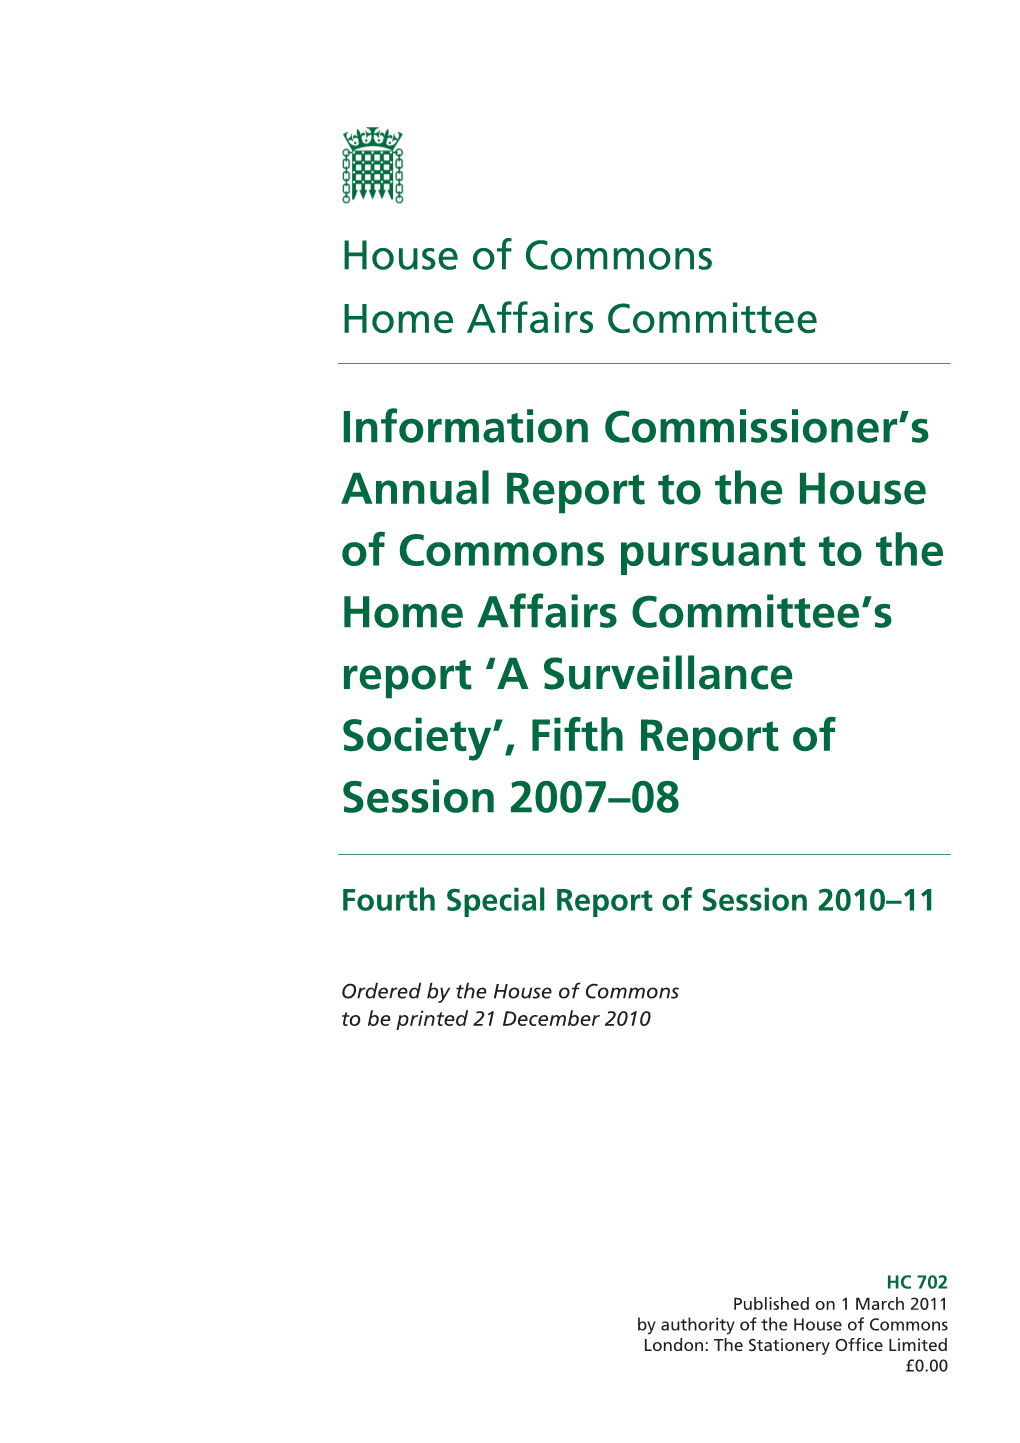 A Surveillance Society’, Fifth Report of Session 2007–08